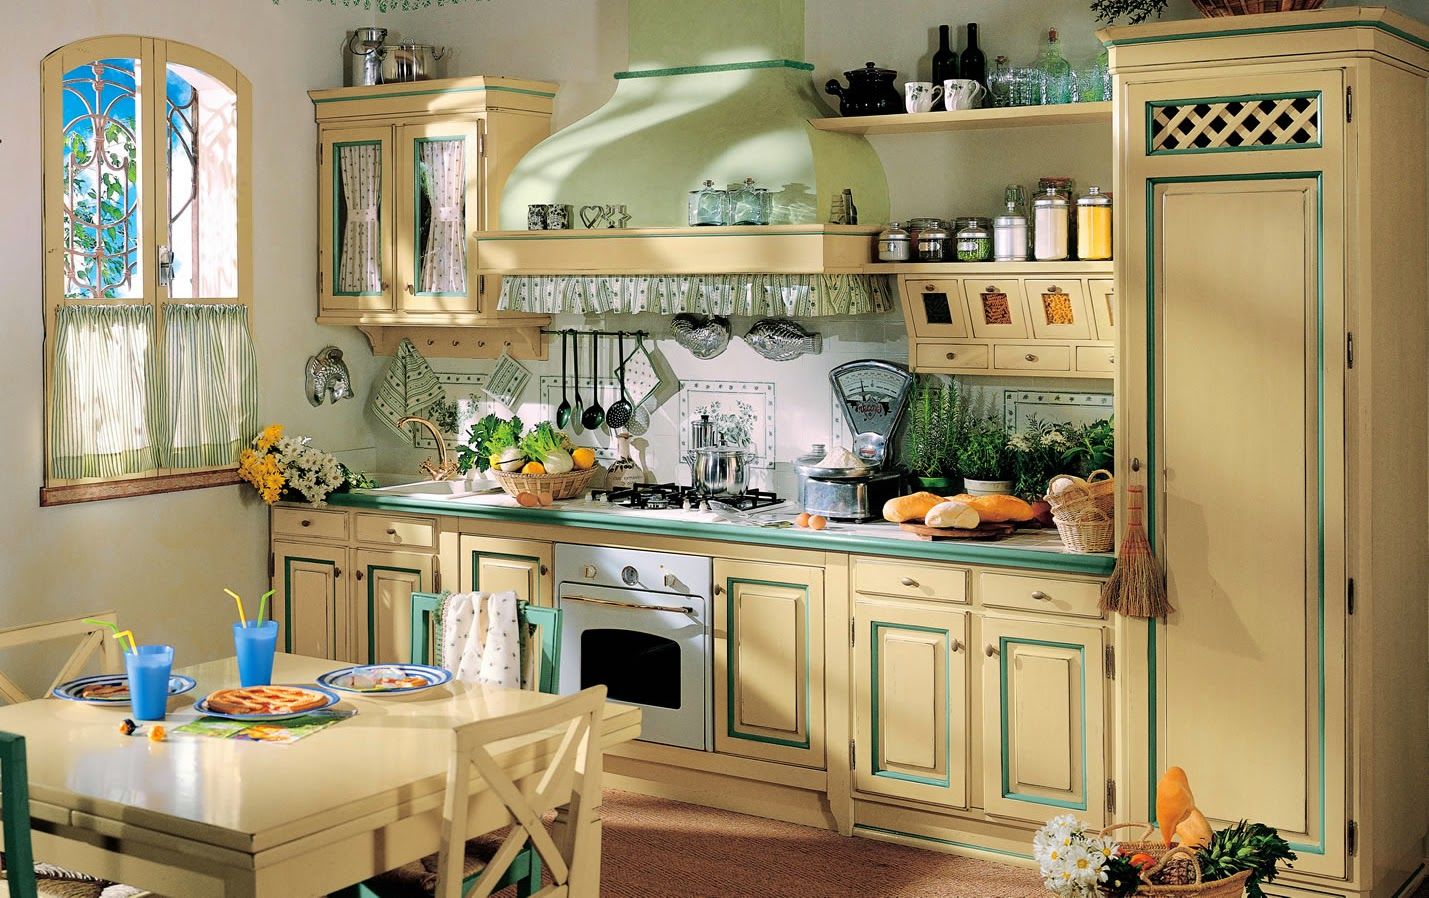 5 kitchen ideas for country style